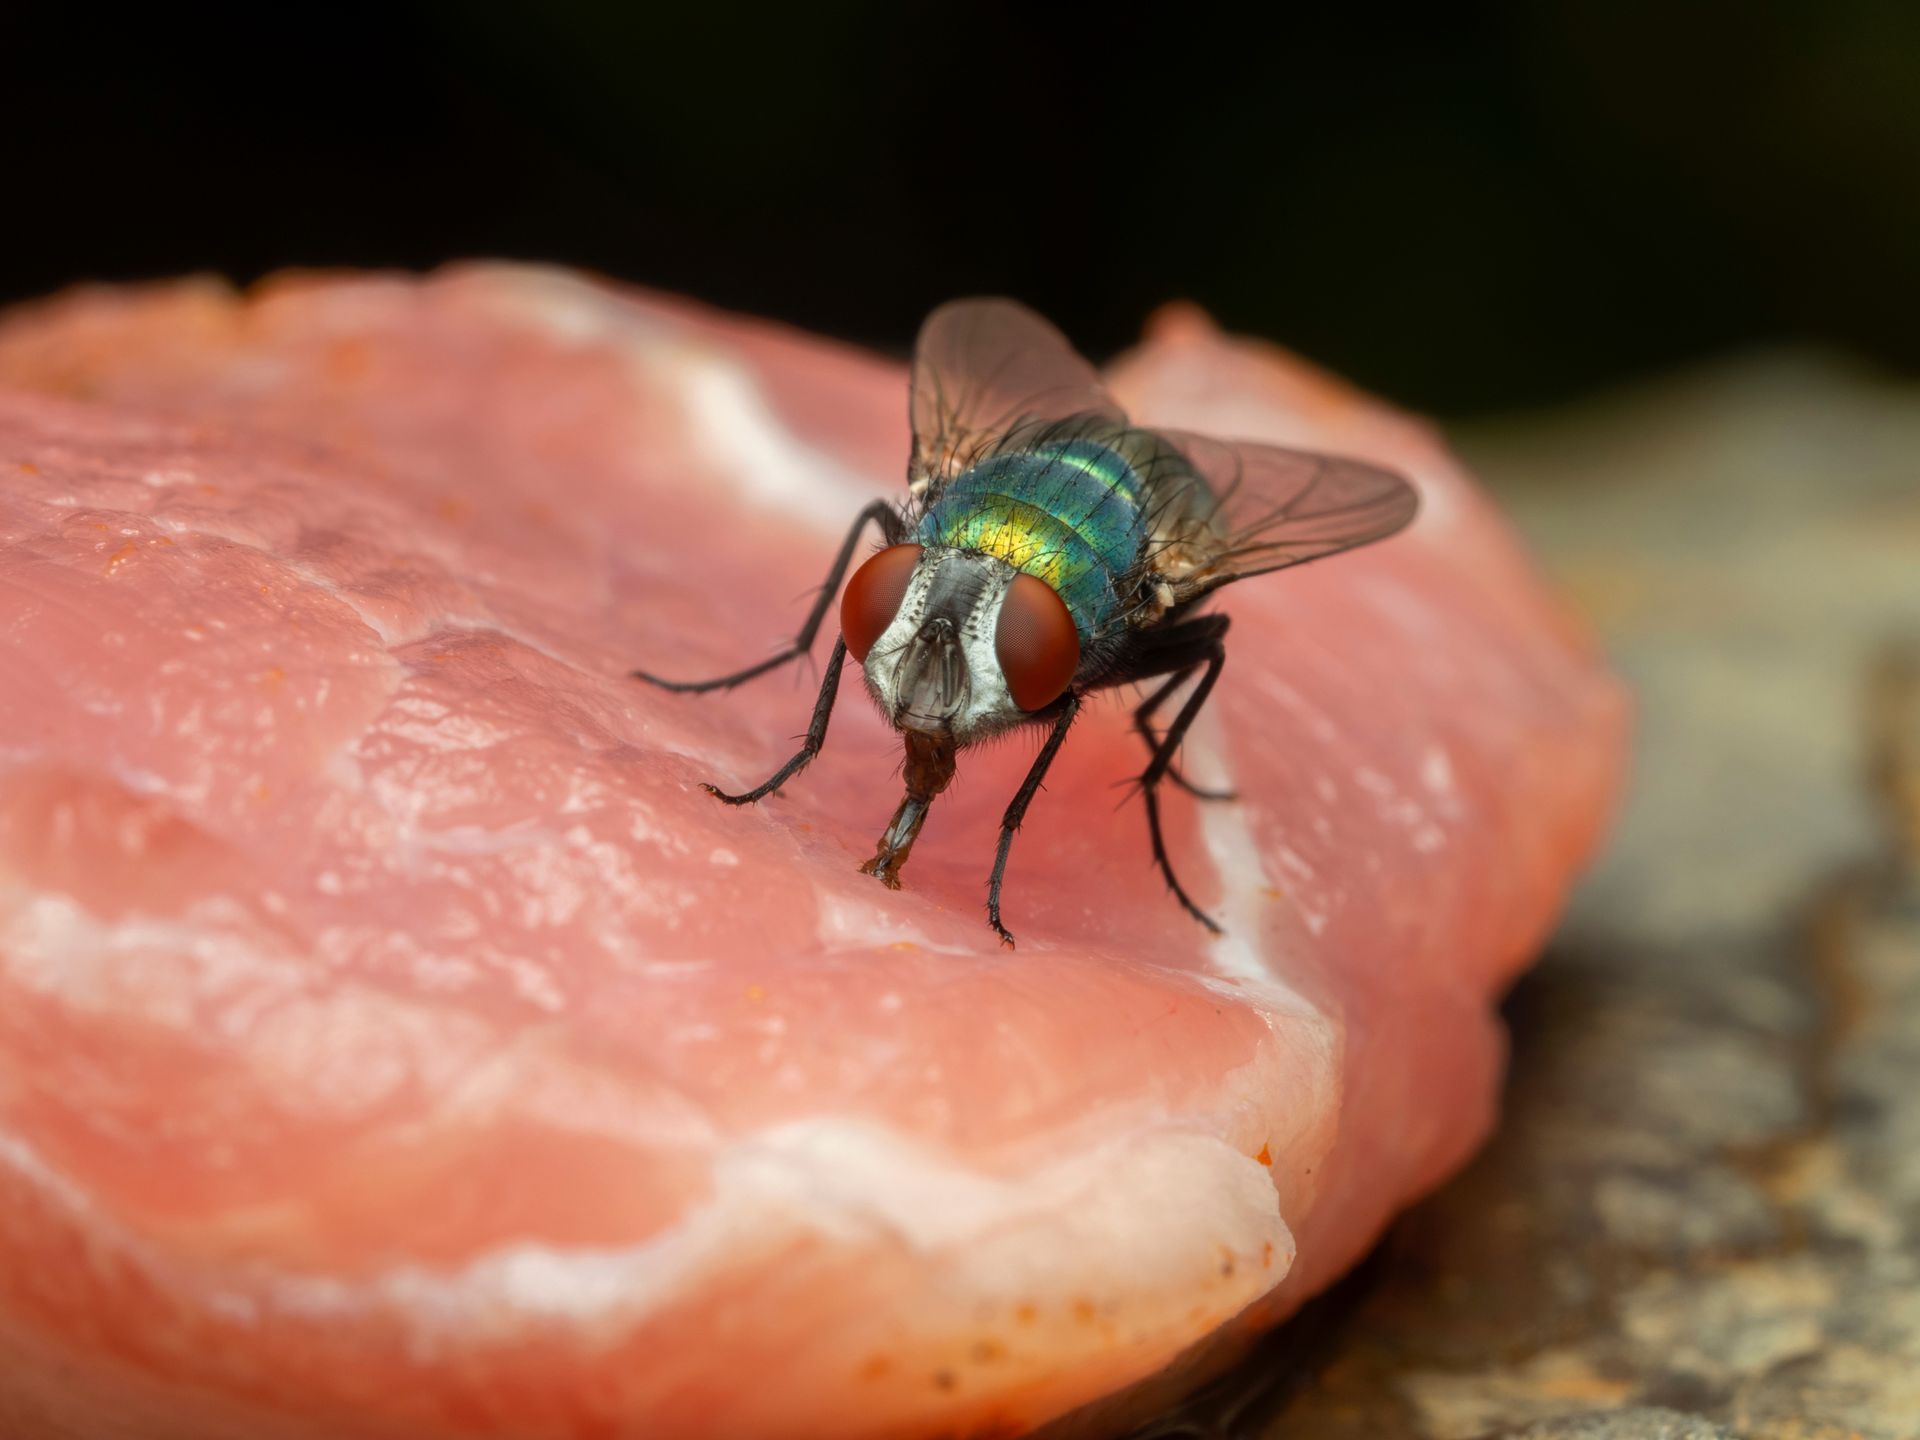 A fly is sitting feeding on a piece of meat.